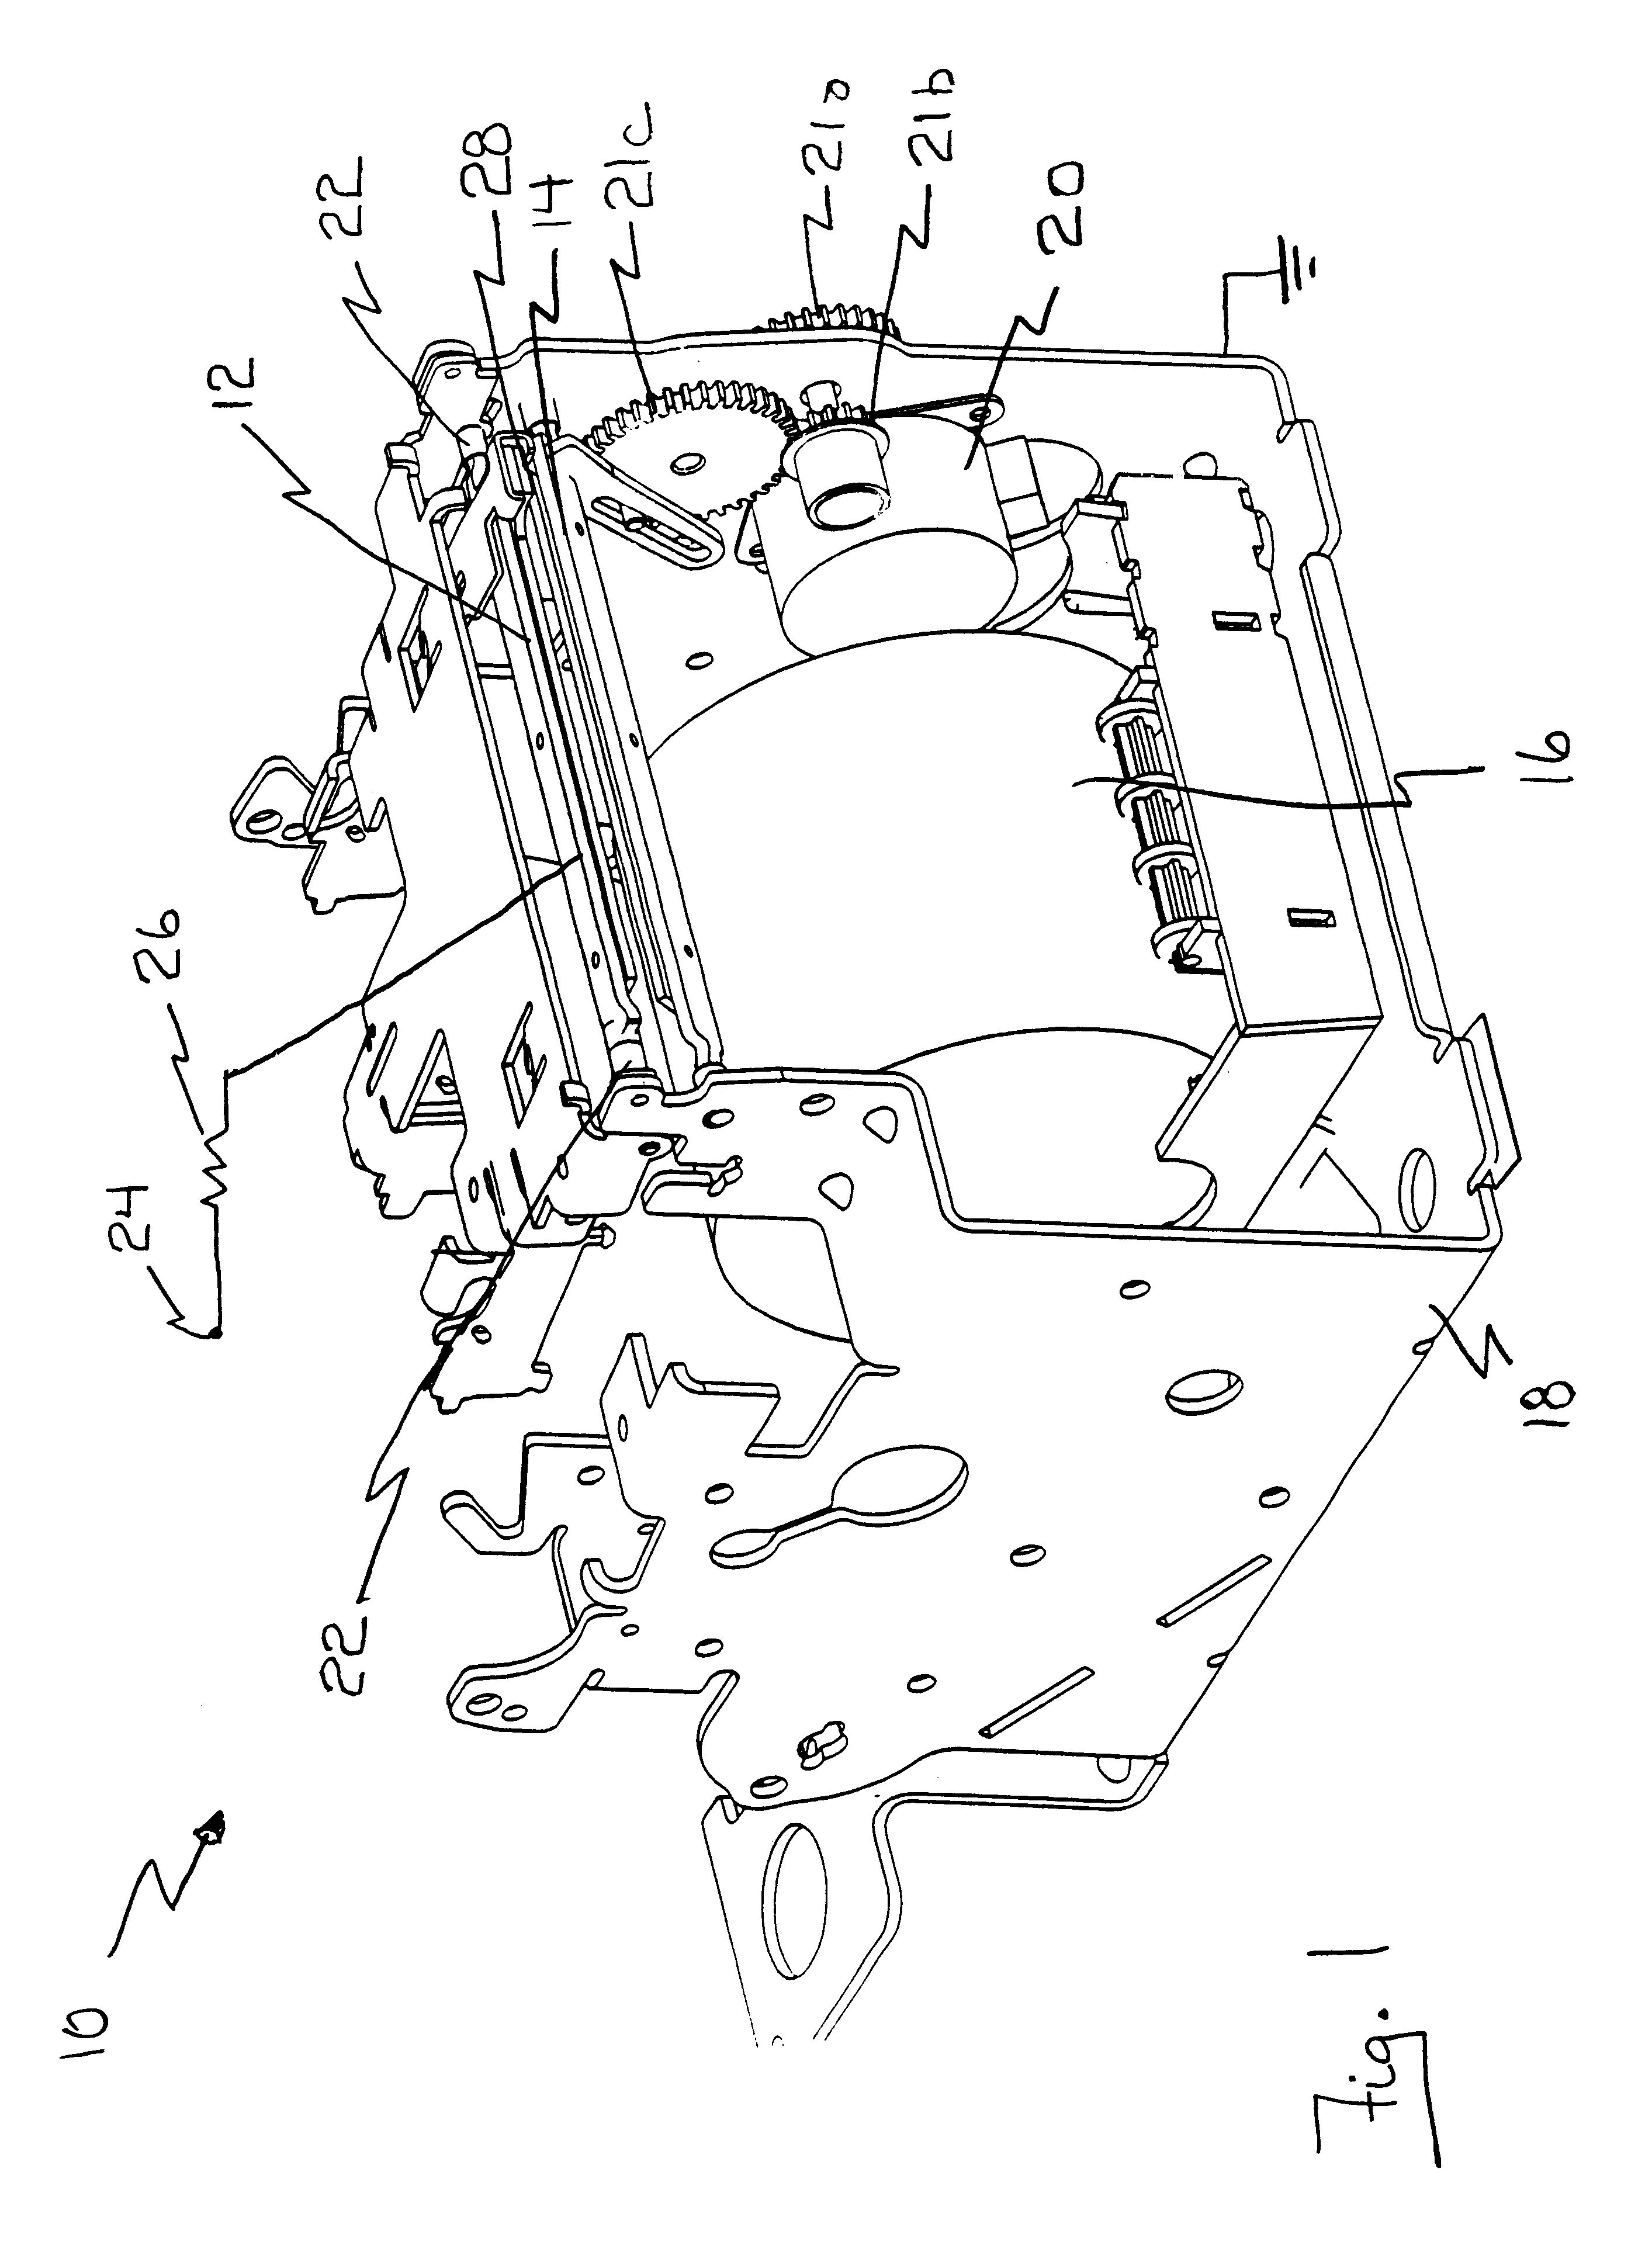 Cutter blade position detection mechanism and method of reporting cutter malfunction